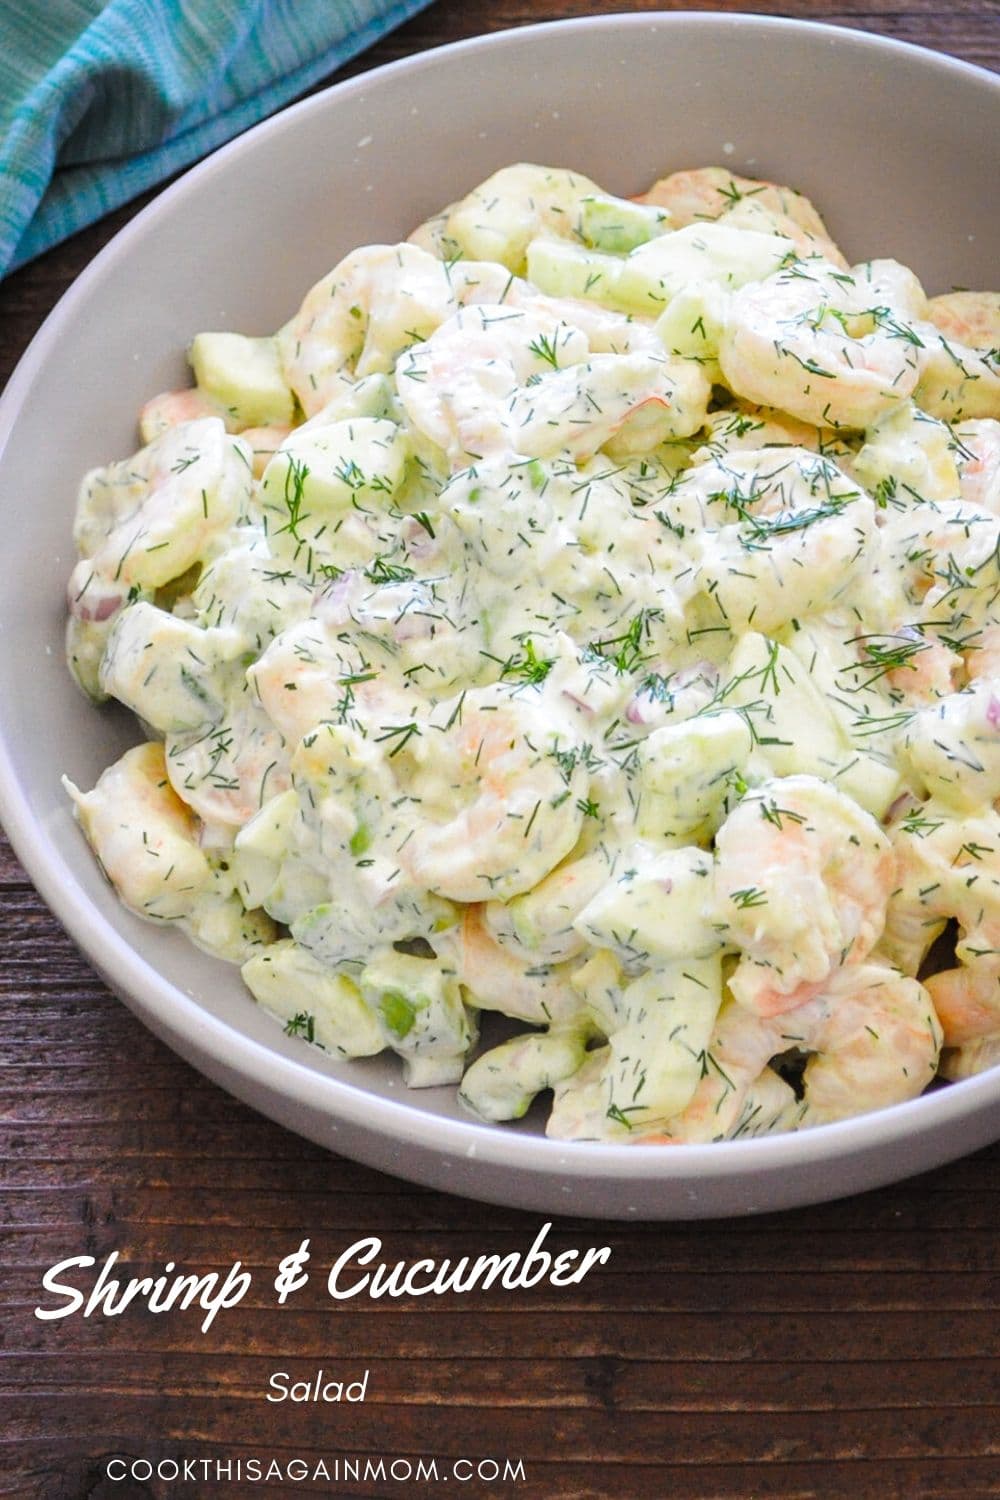 Pinterest image featuring shrimp and cucumber salad in a gray bowl